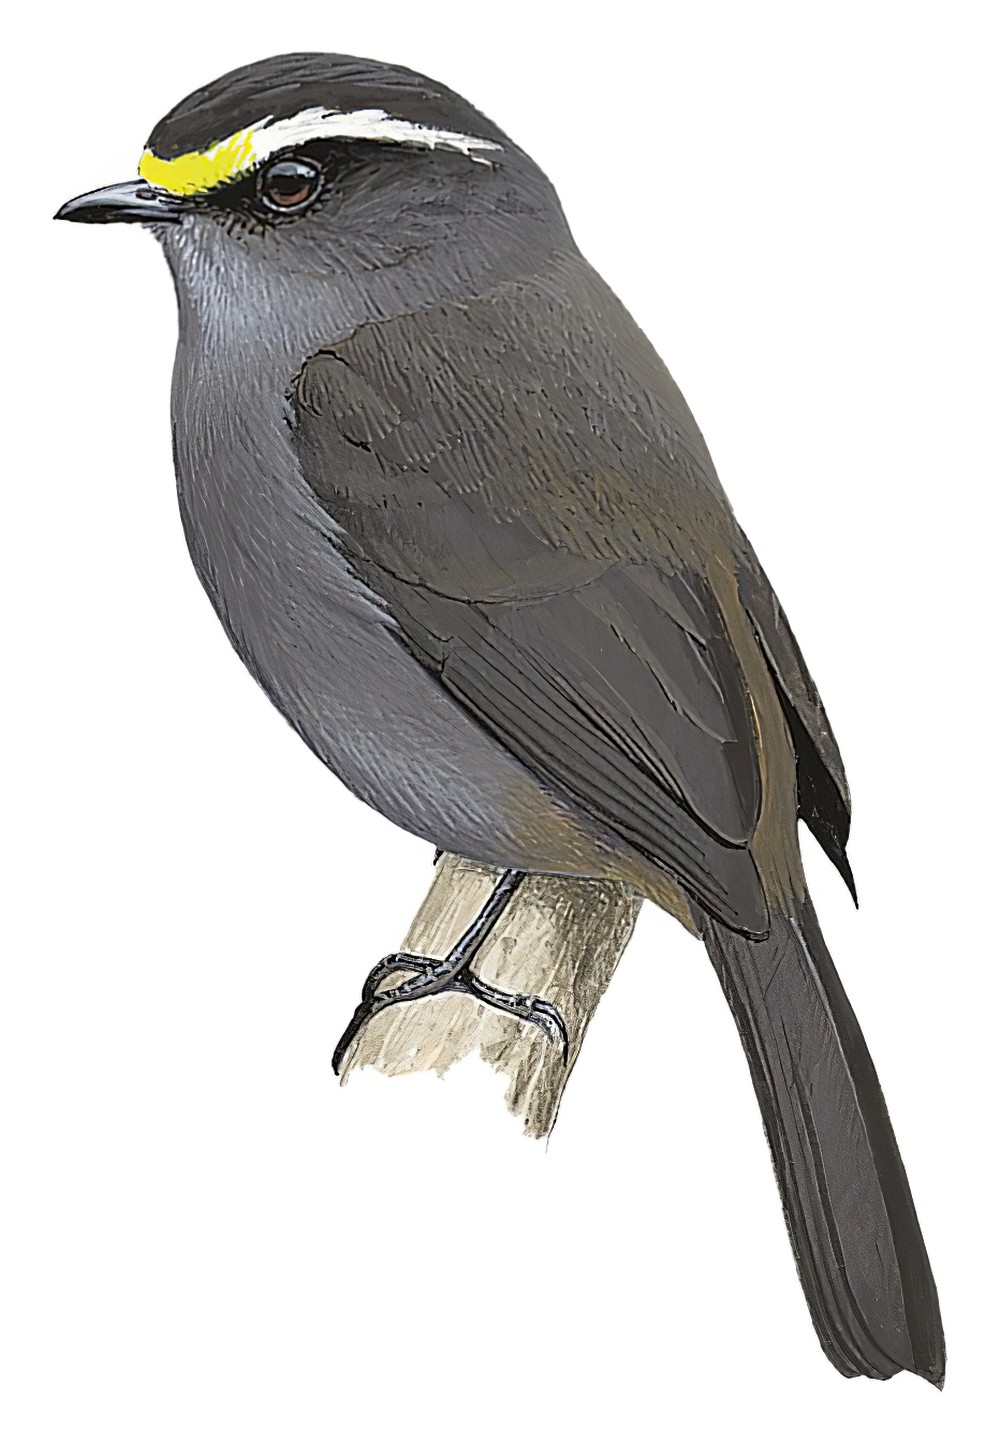 Crowned Chat-Tyrant / Ochthoeca frontalis